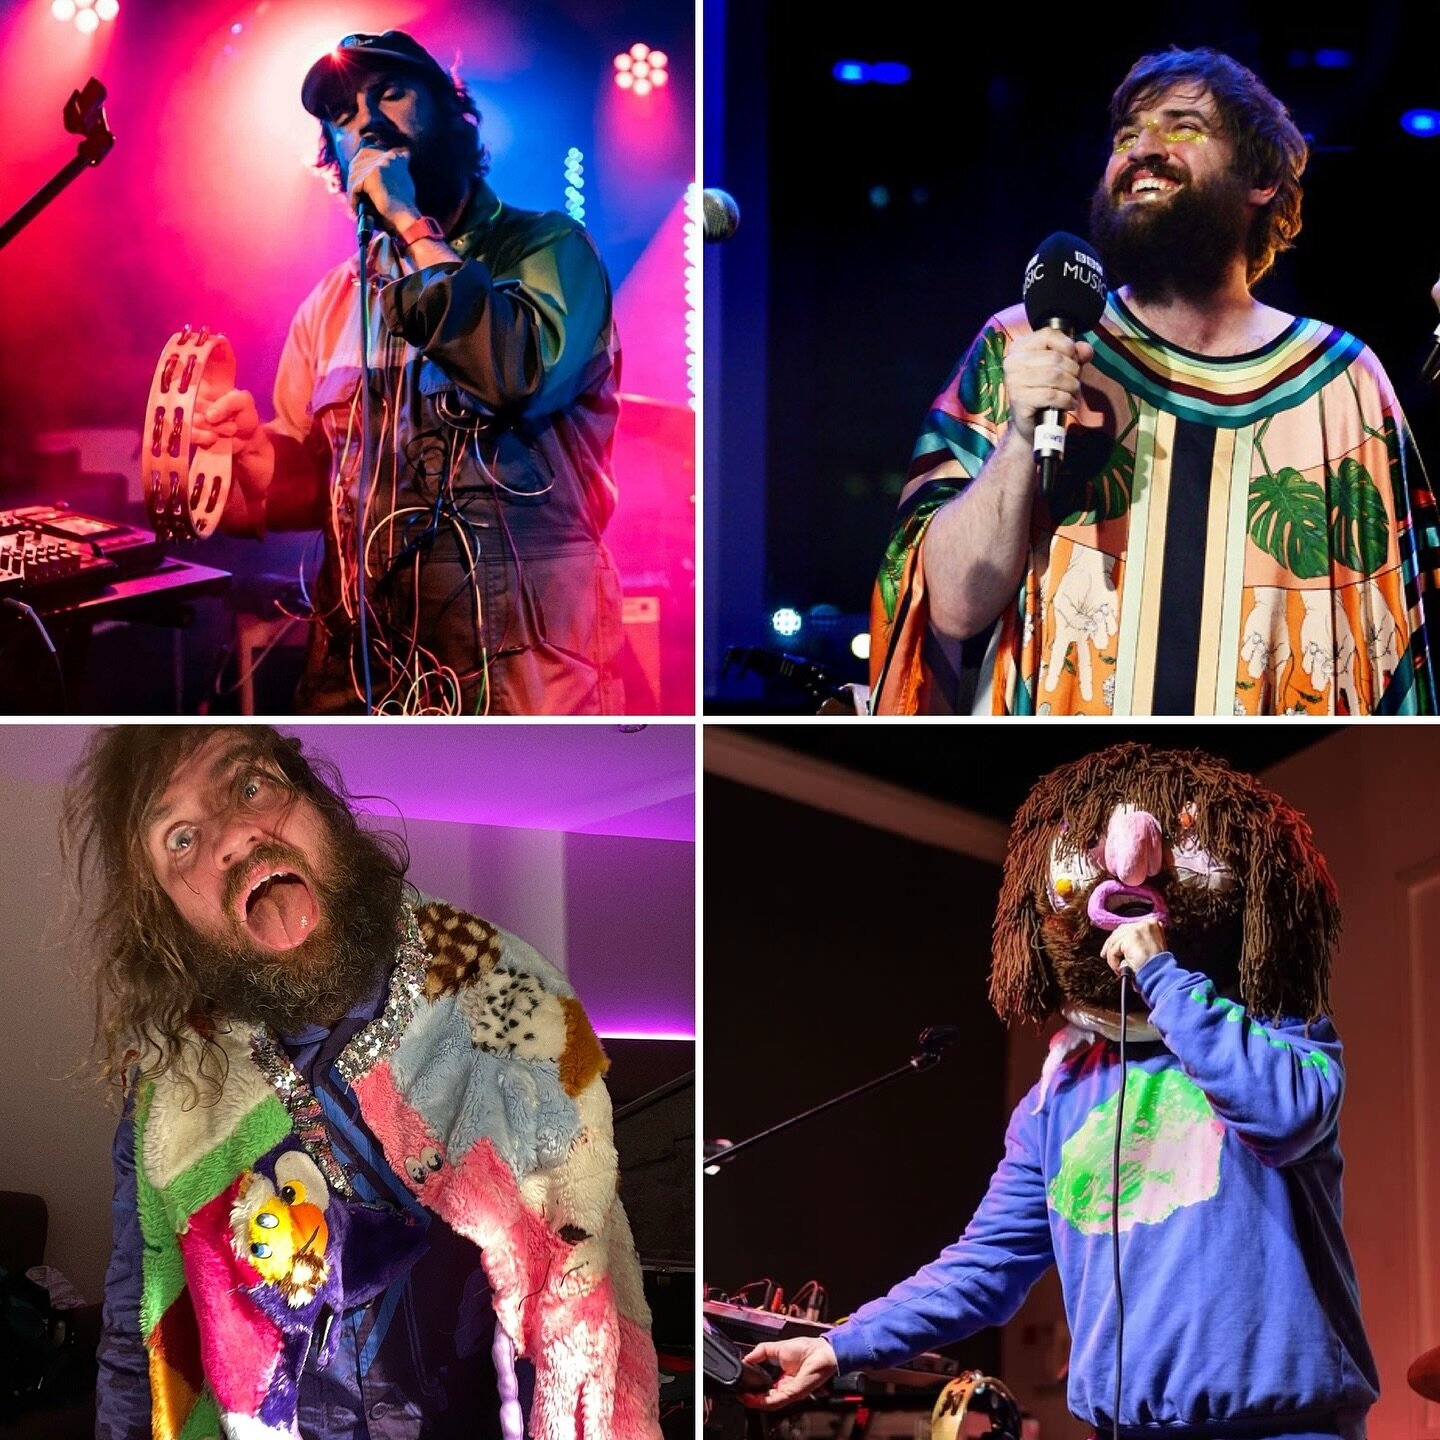 Trying to work out what look I should go for, on next week&rsquo;s tour. Clockwise from top: A) Unemployed TV repair man in a boiler suit with bomb-disposal unit LED lighting cable cumberbund; B) Glitter slapped hobo in a psychedelic moo-moo; C)Track